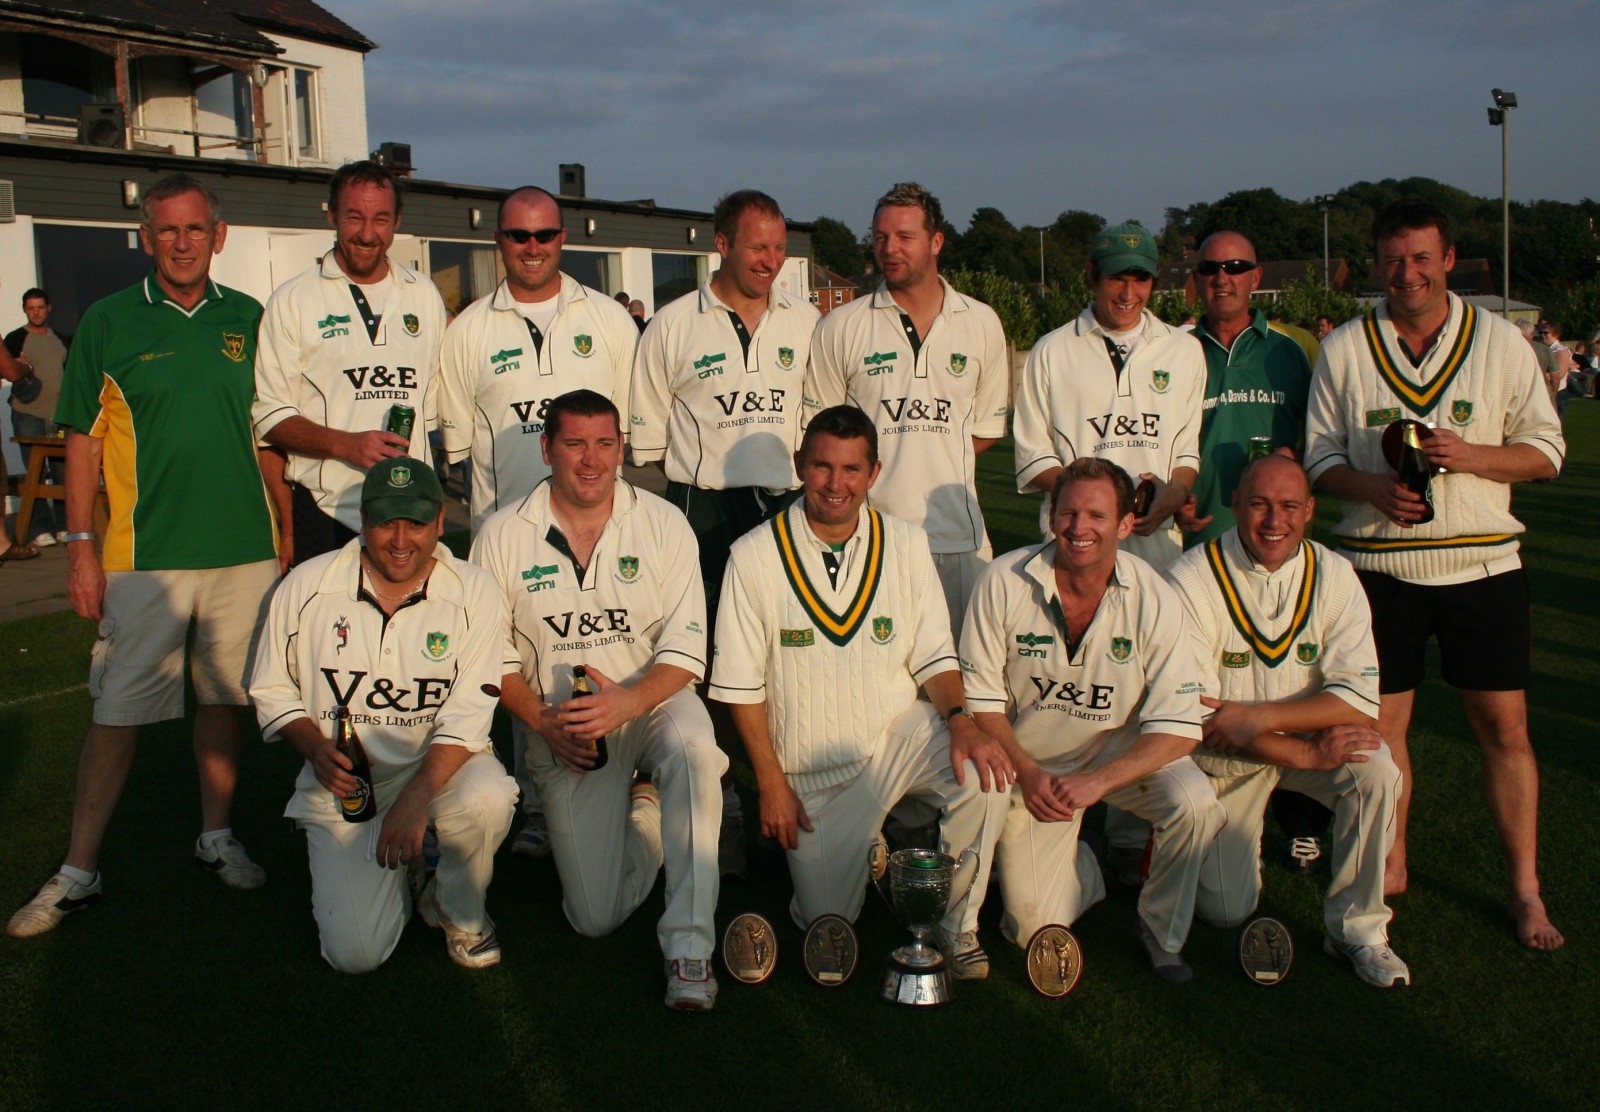 20 Sep - Yorkshire Cricket Council PlayOffs - Yorkshire Coun